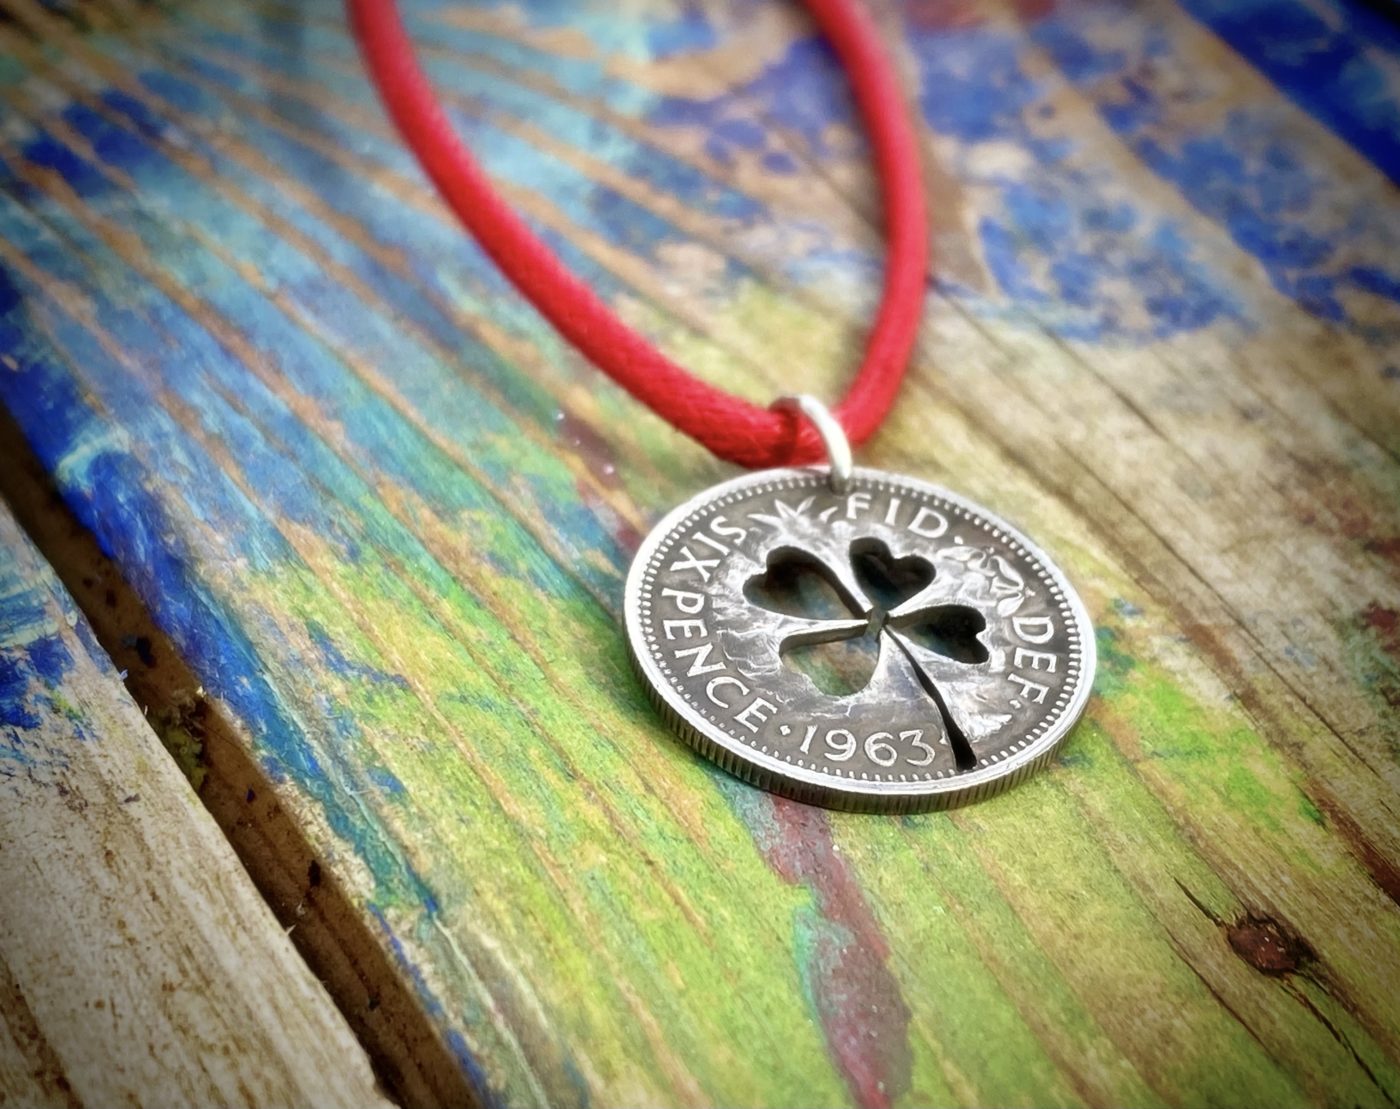 60th birthday Lucky sixpence coin jewellery 1963 Handcrafted and recycled lucky sixpence coin necklace pendant